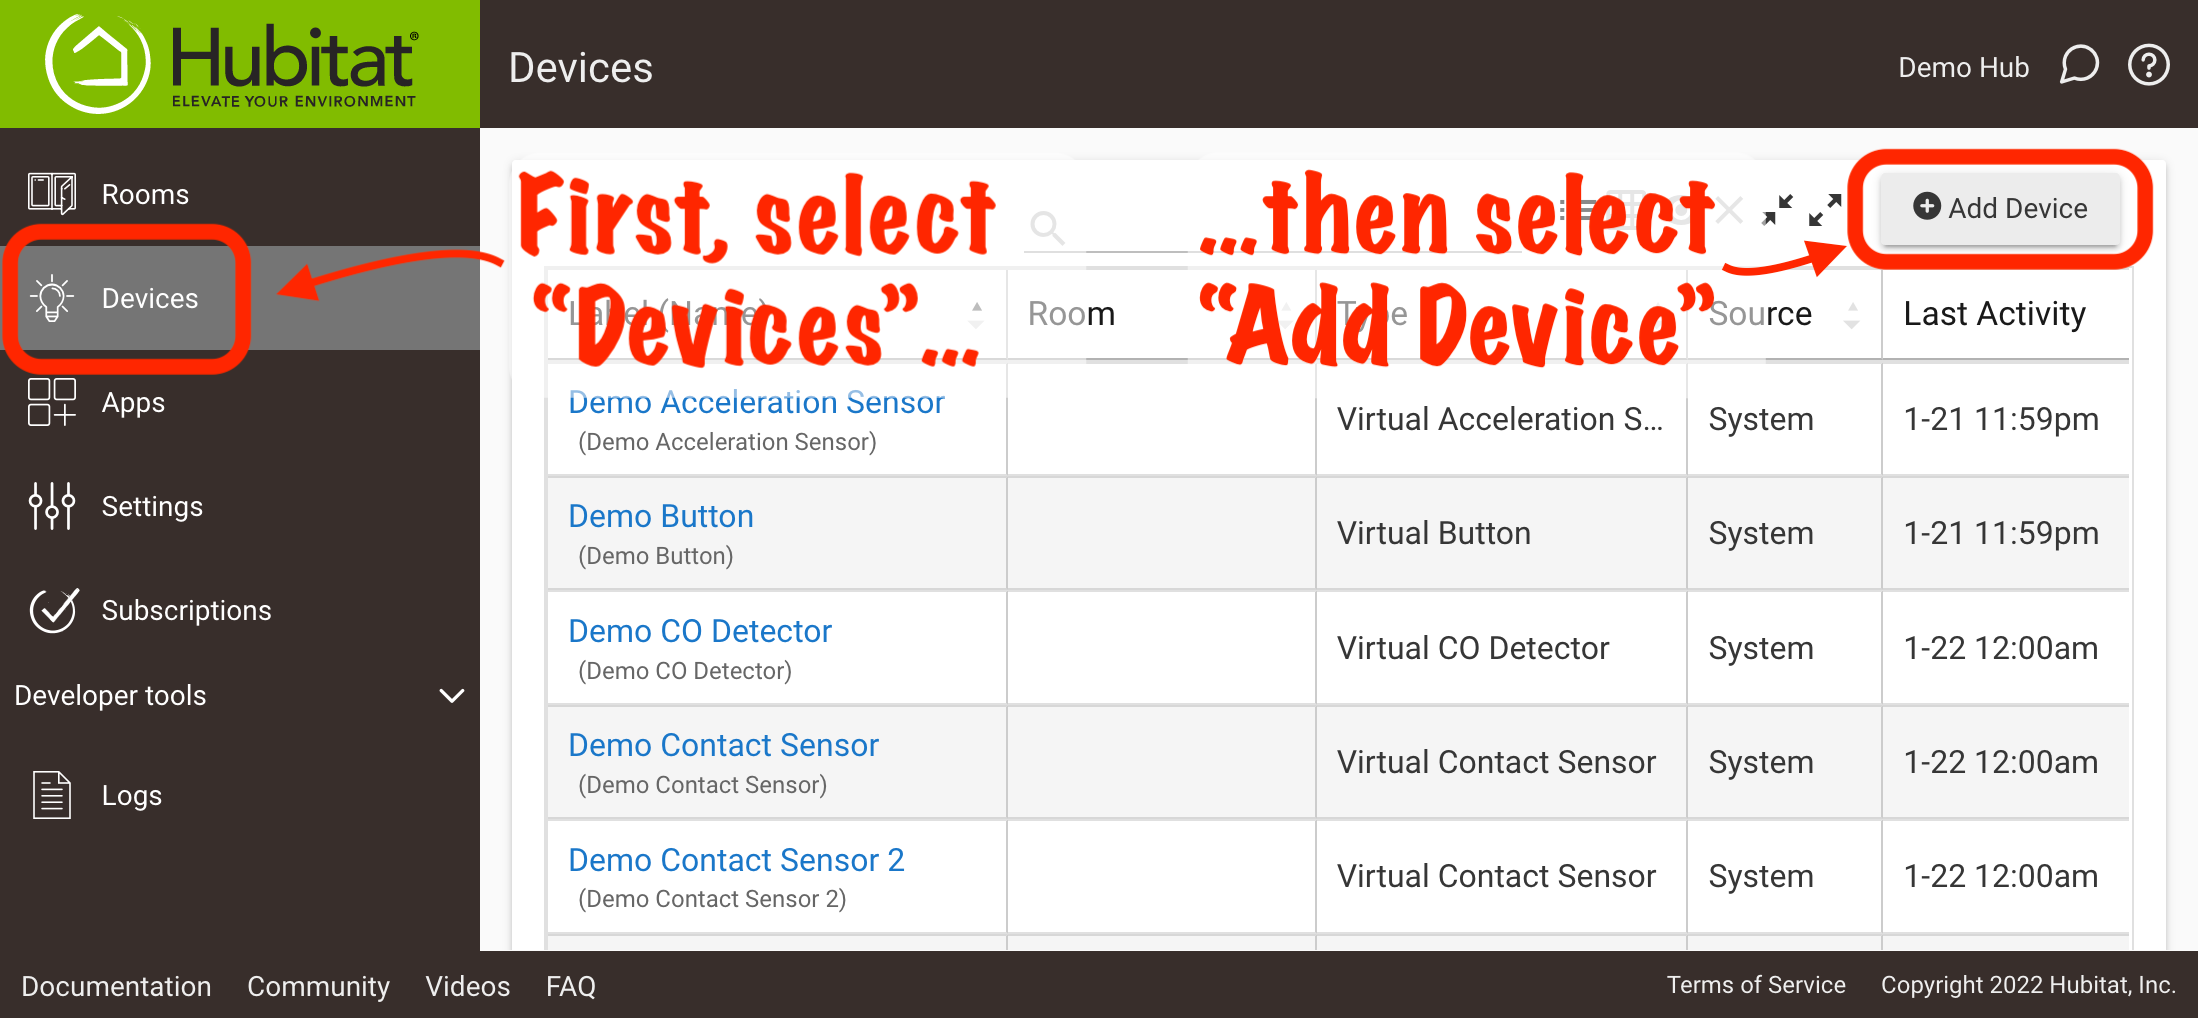 Screenshot of "Add Device" button on Devices page